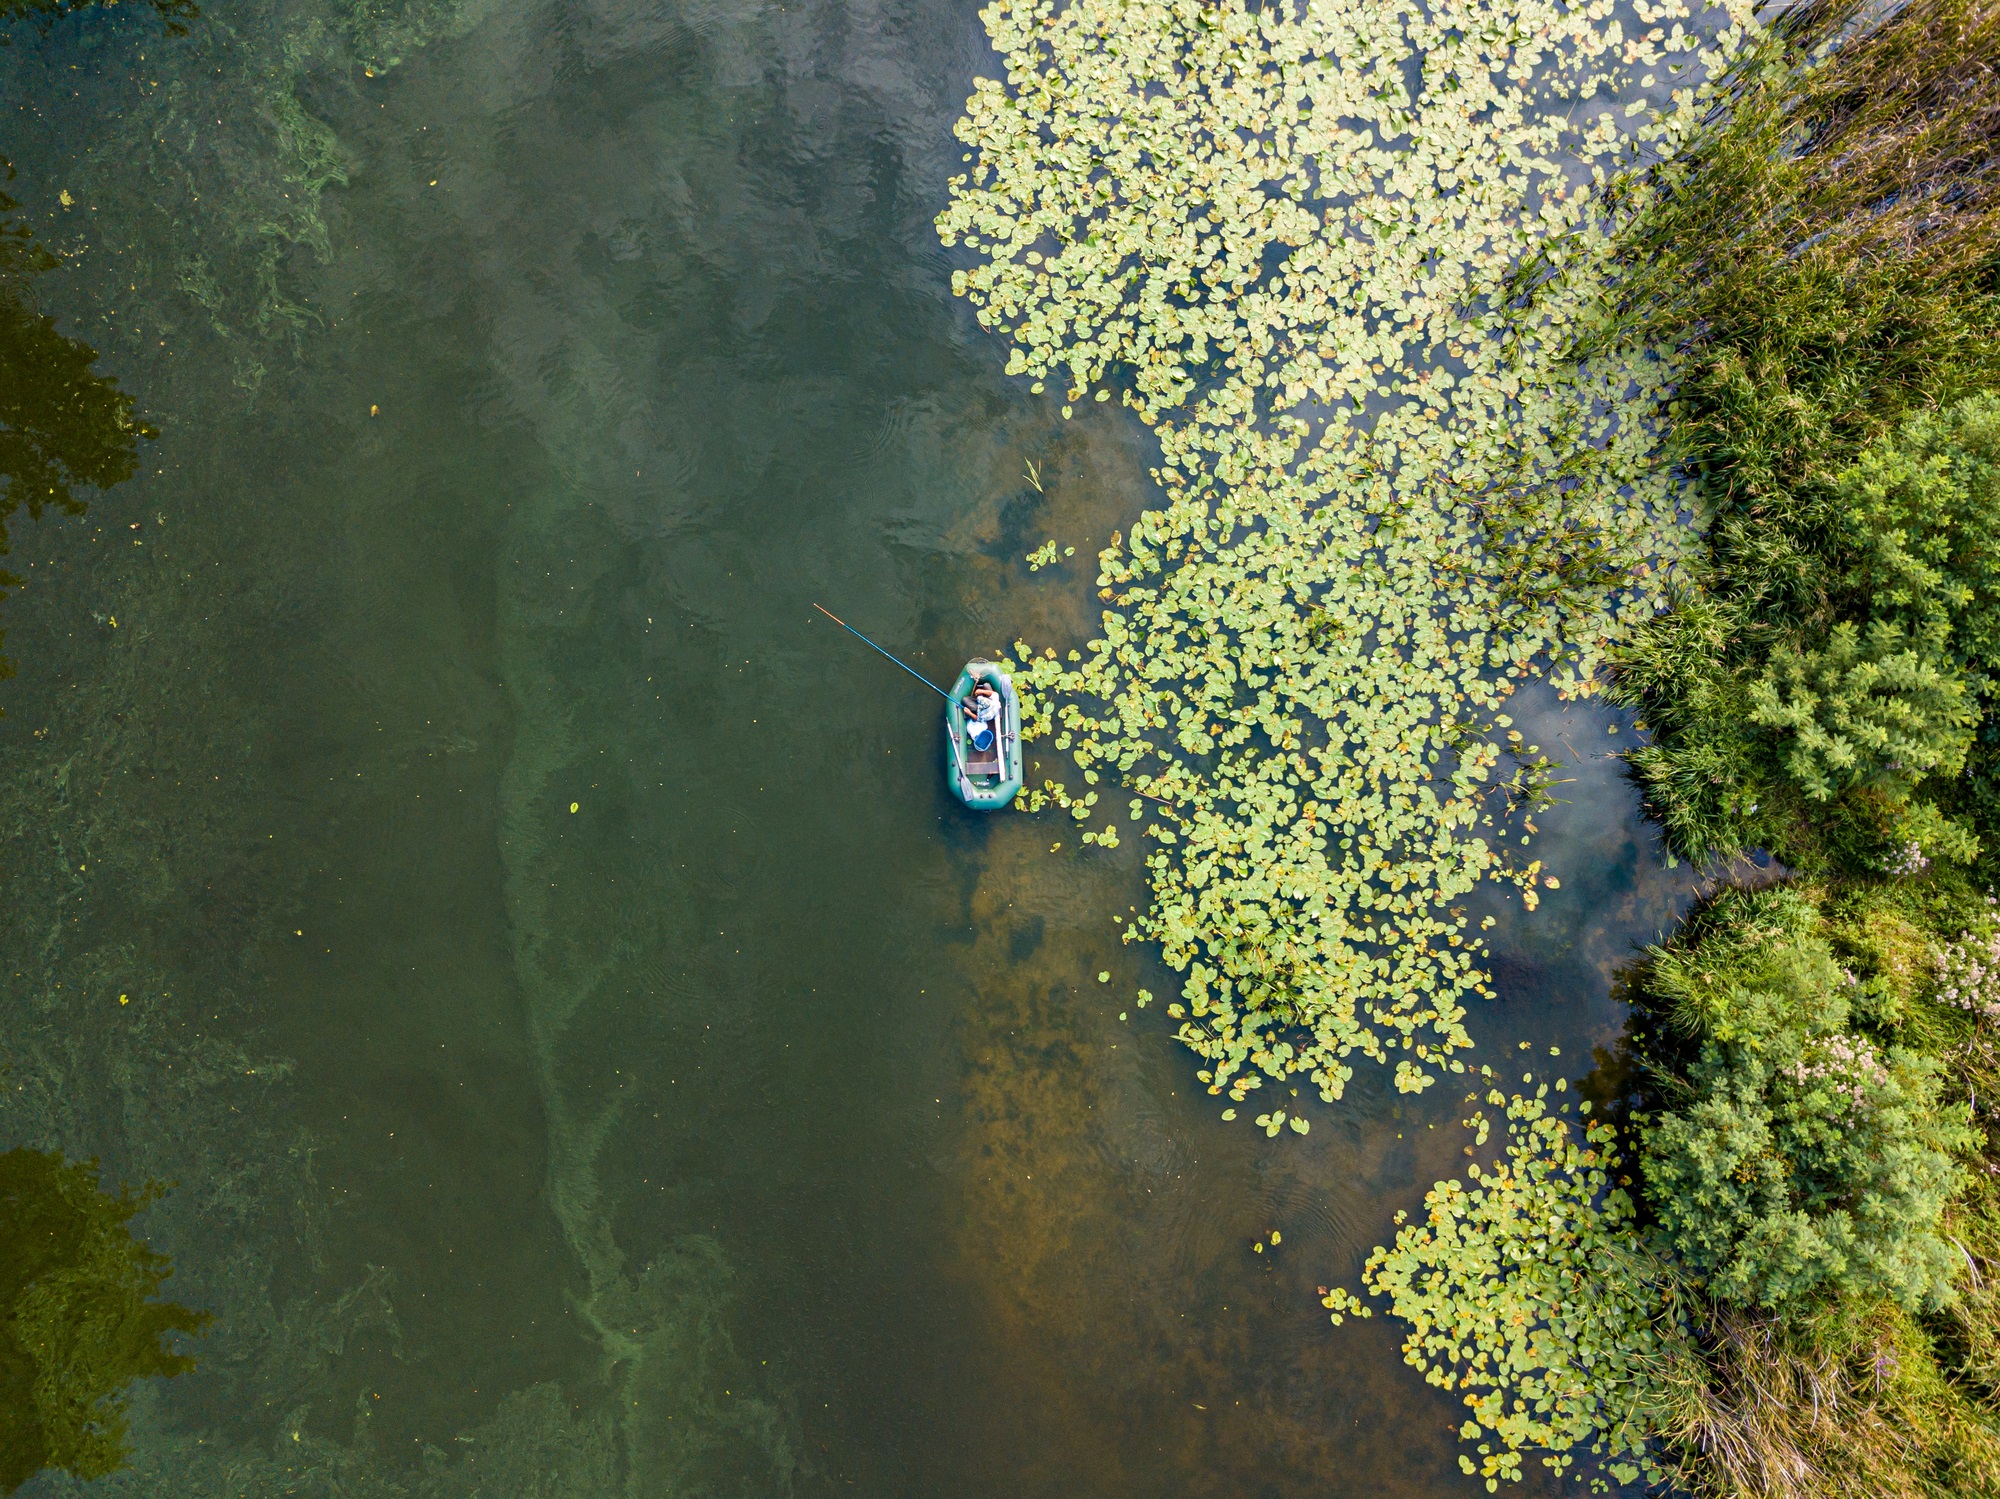 Algae bloom caused by climate change in a fishing river with aquatic plants along the edge